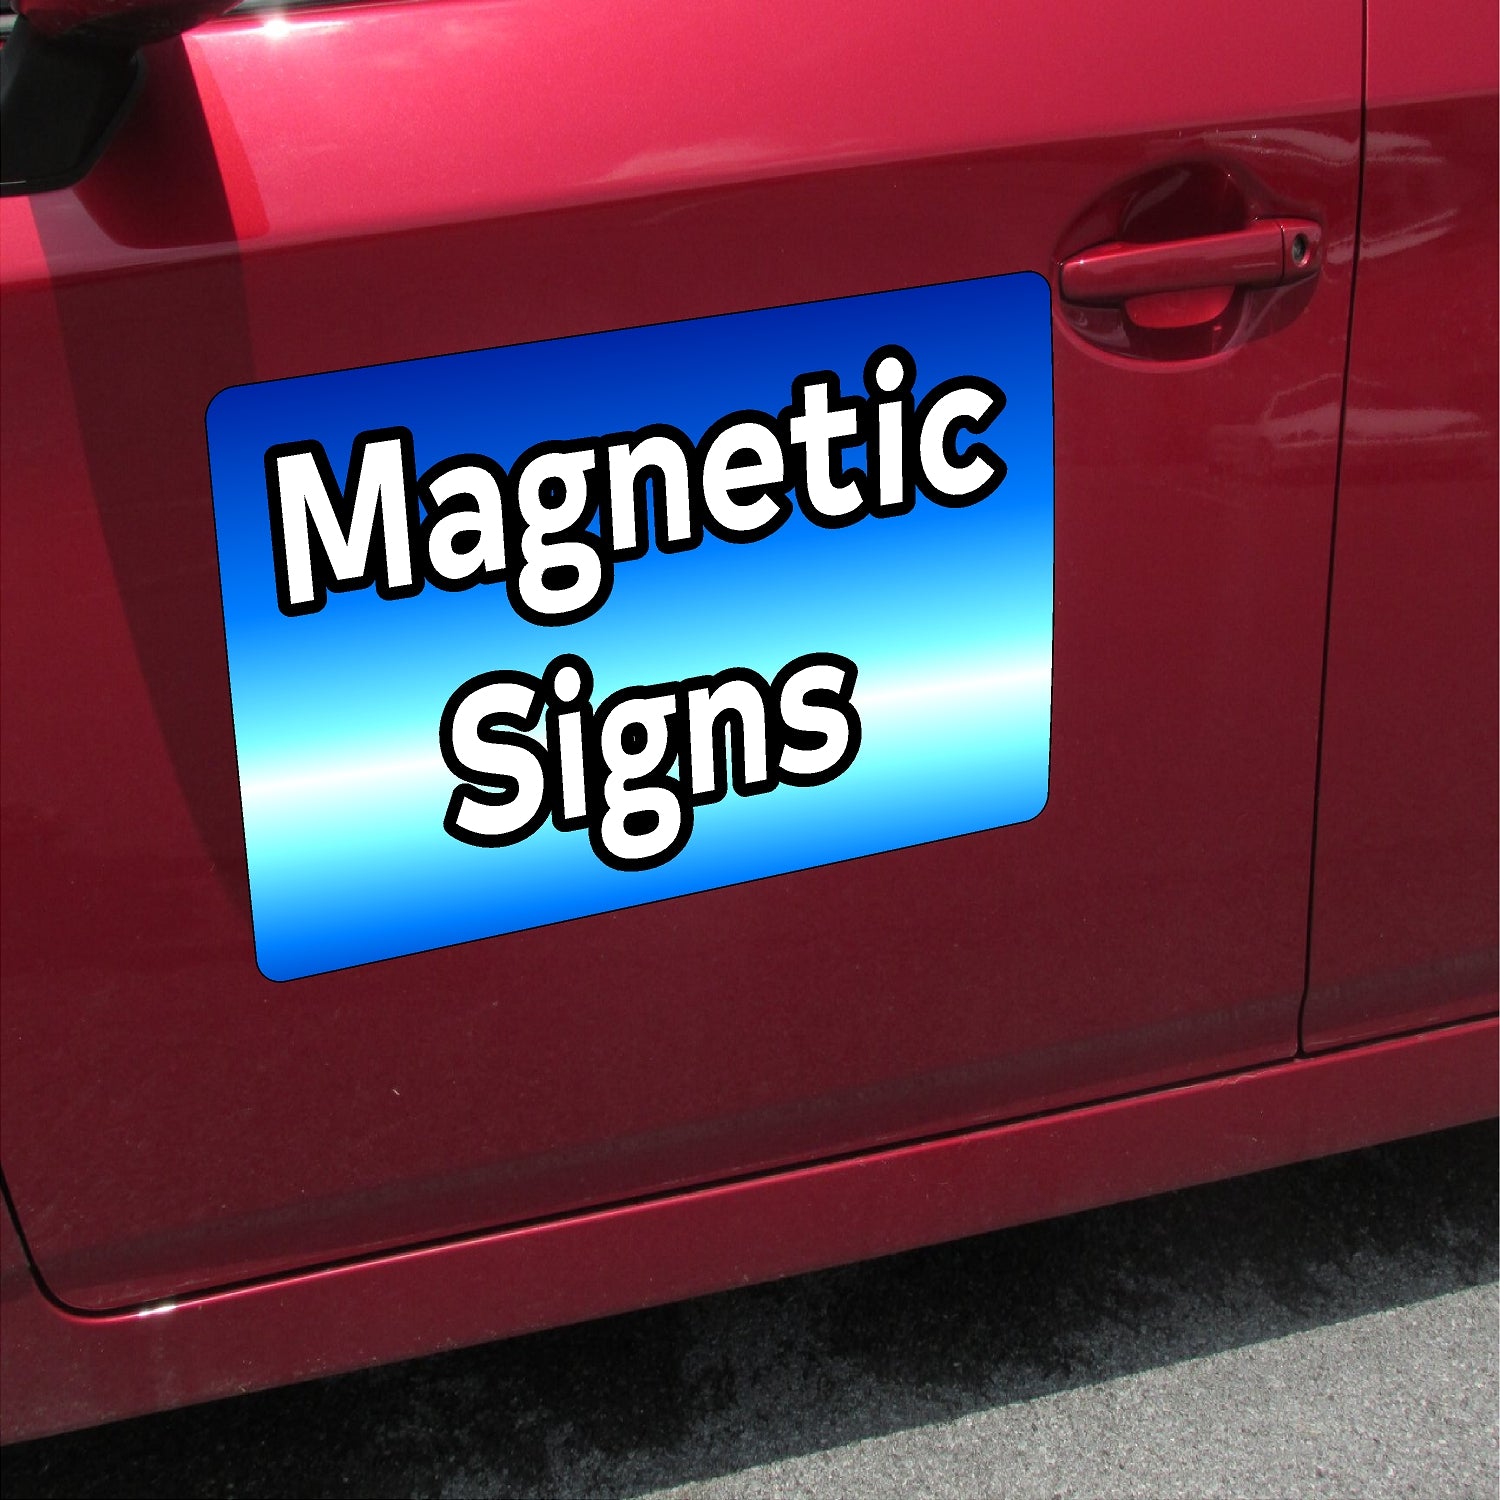 Magnetic Signs Vehicle Magnets Car Magnets Truck Magnets - RSGfx.com